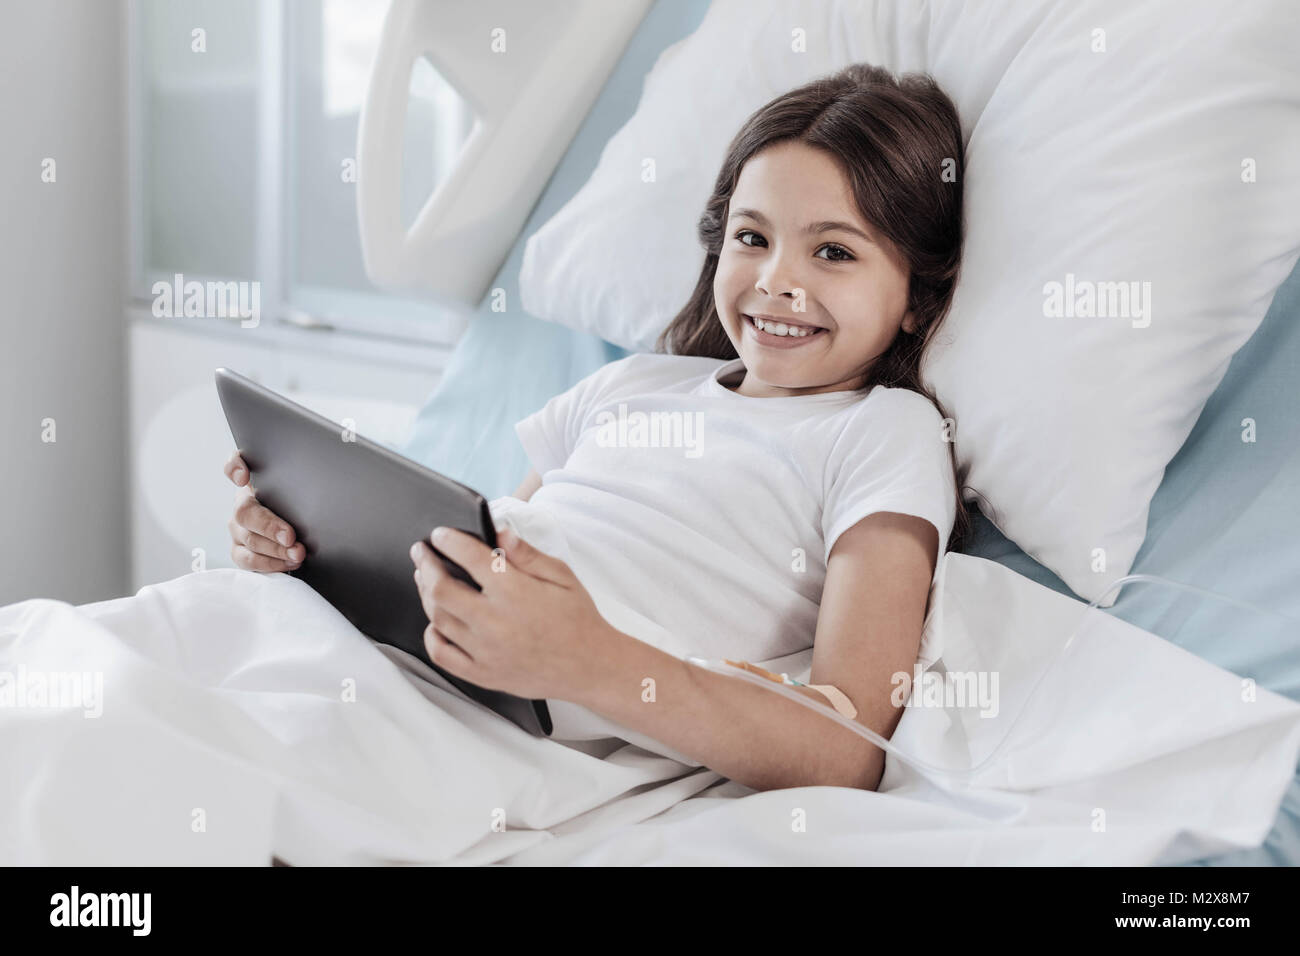 Brave girl playing on touchpad while lying in hospital bed Stock Photo